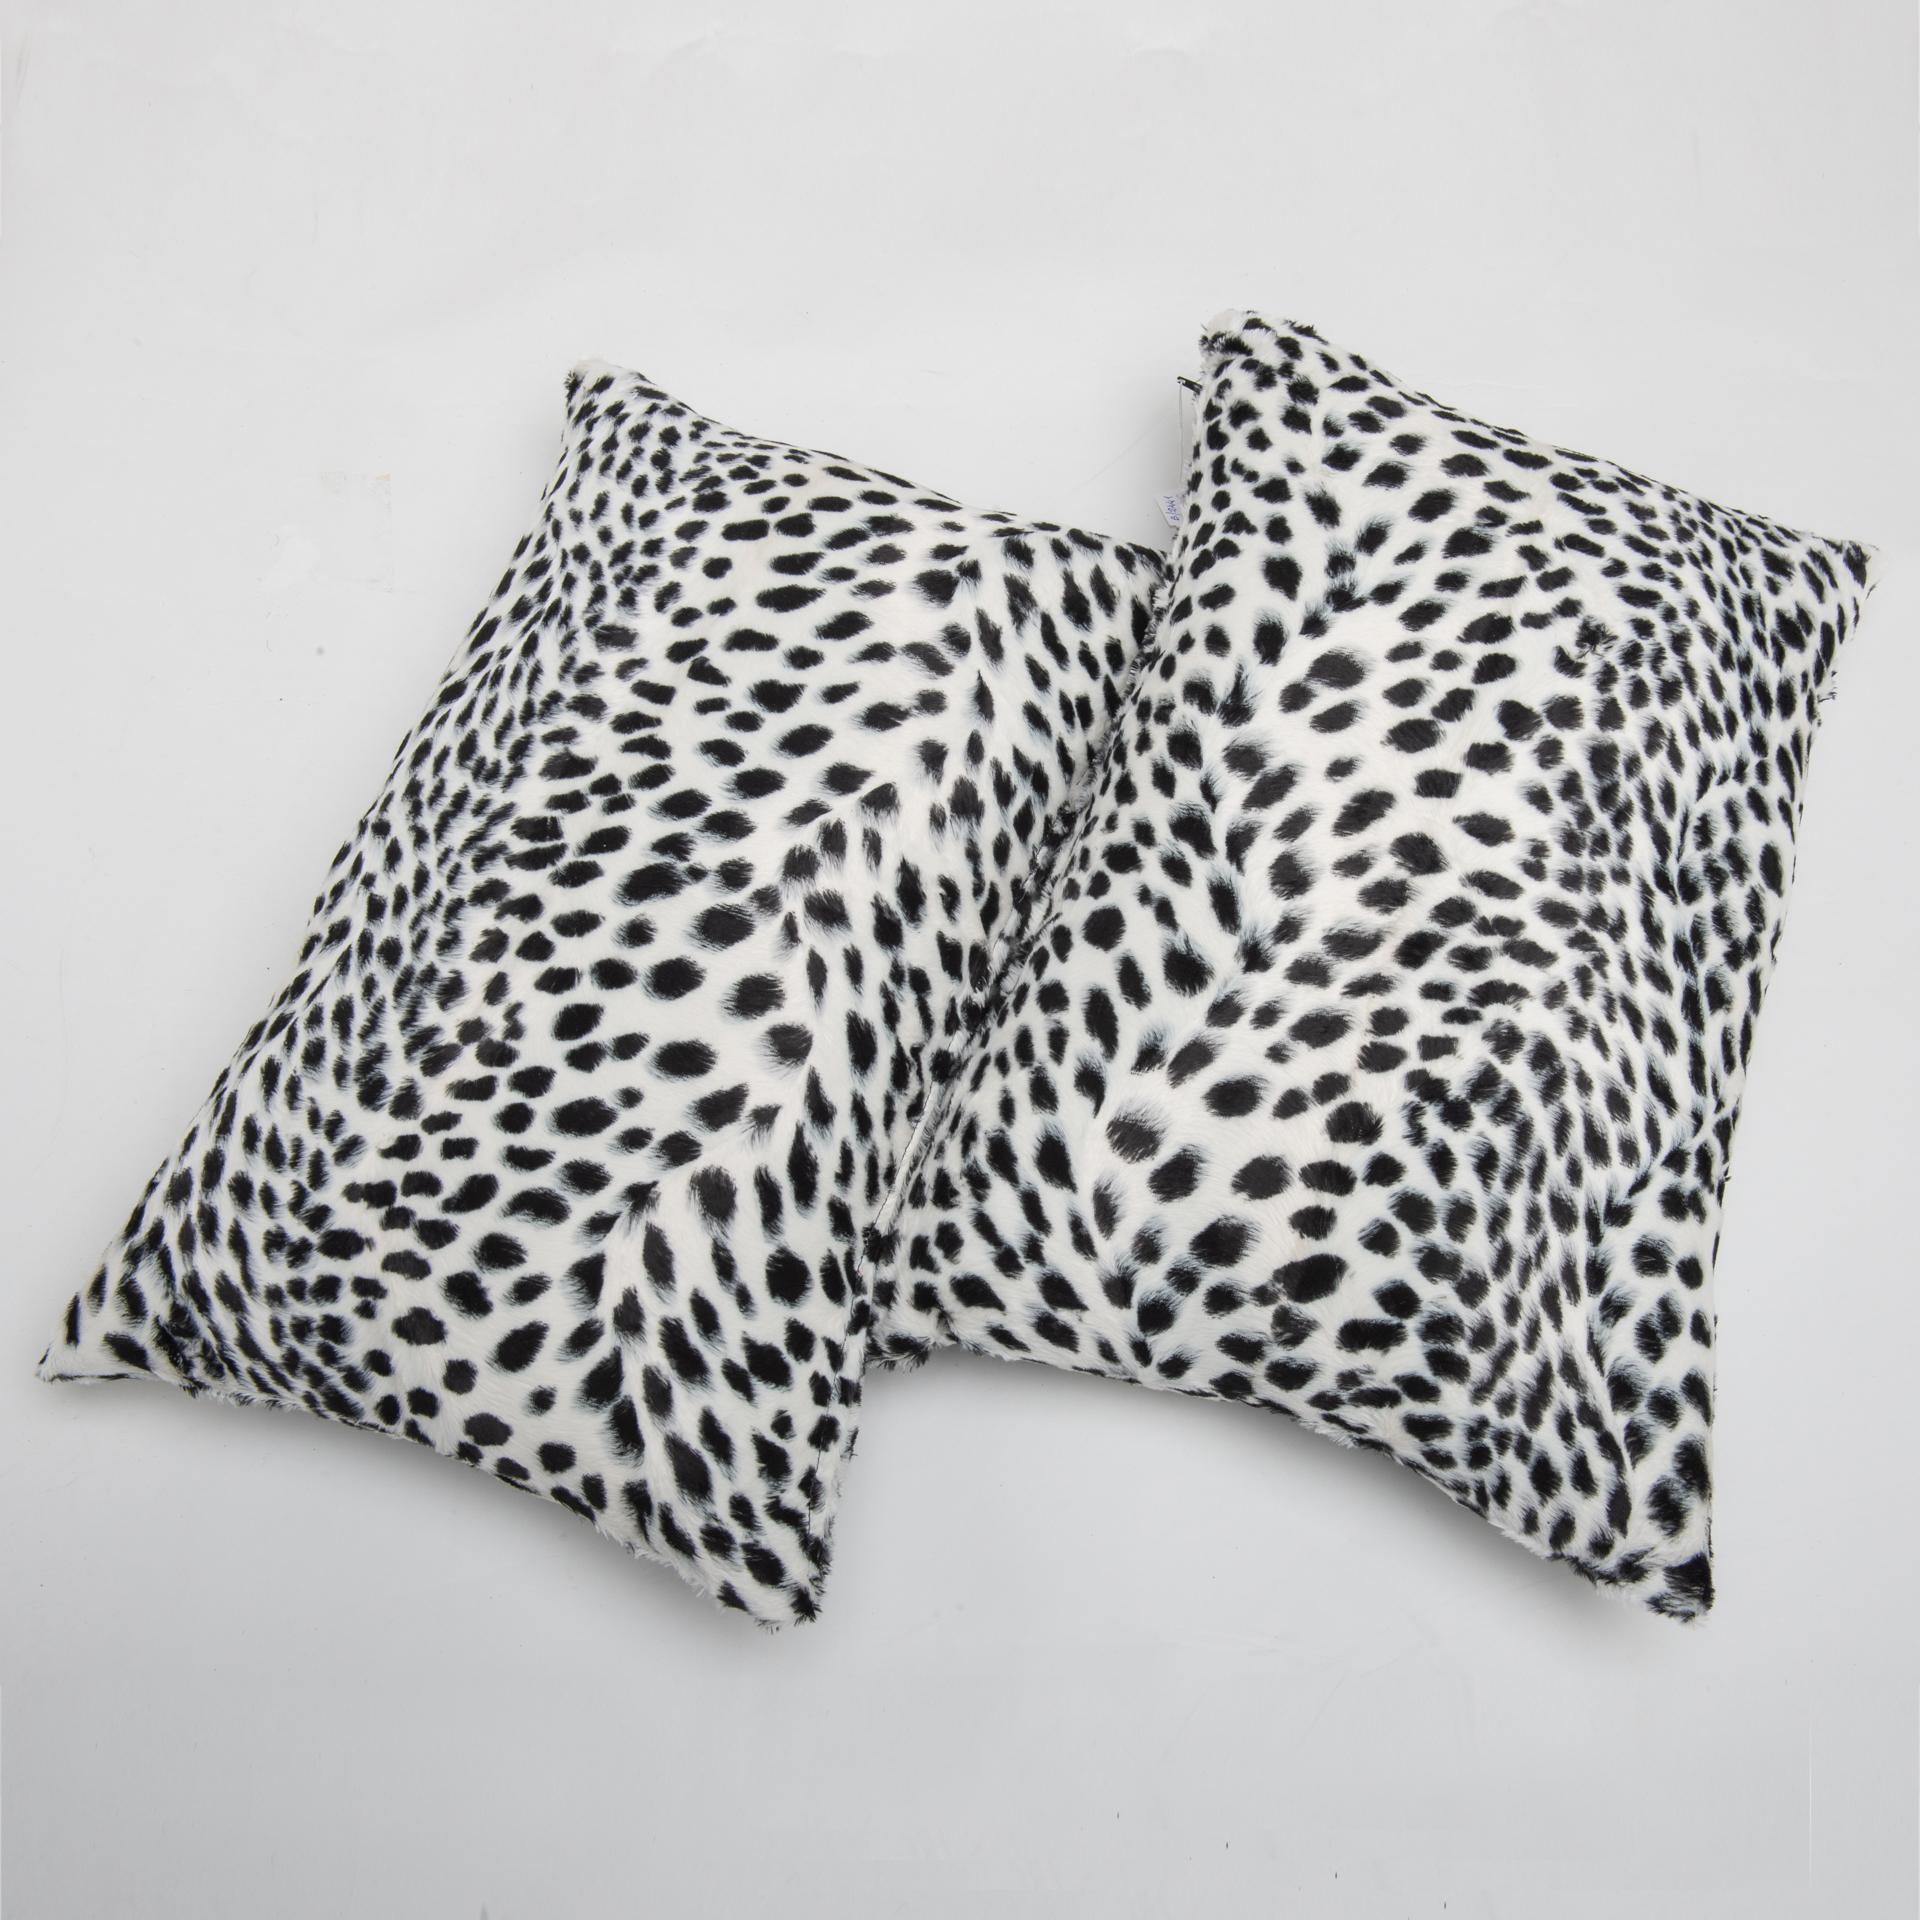 Hand-Woven Pair of Pillows in Black and White Dalmatian Fabric For Sale